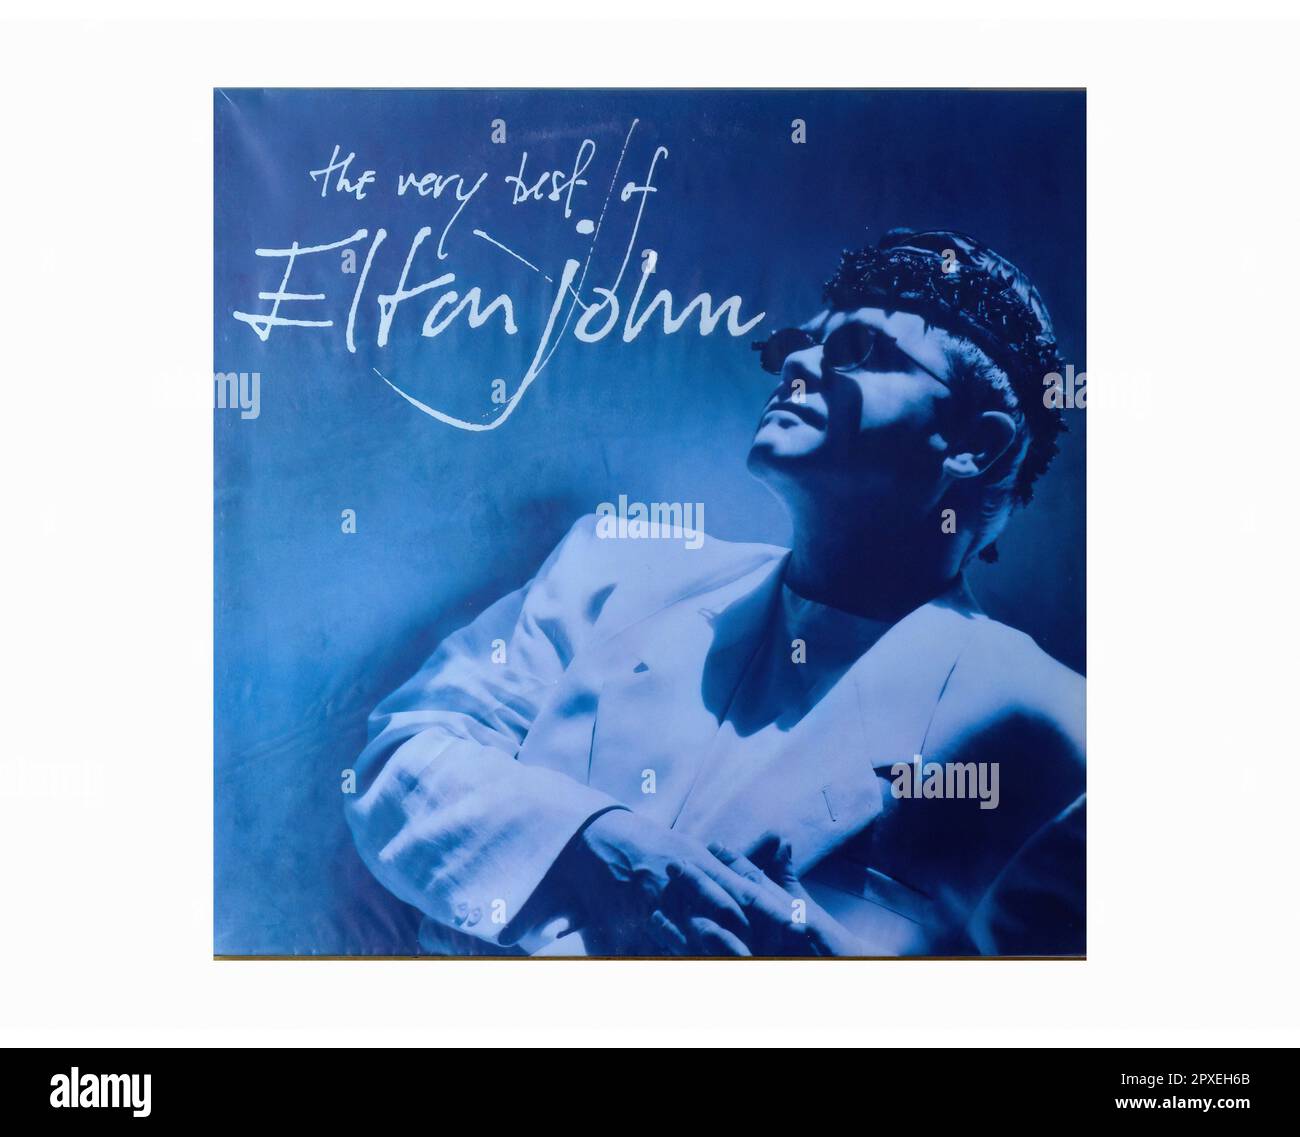 Elton john Cut Out Stock Images & Pictures - Alamy